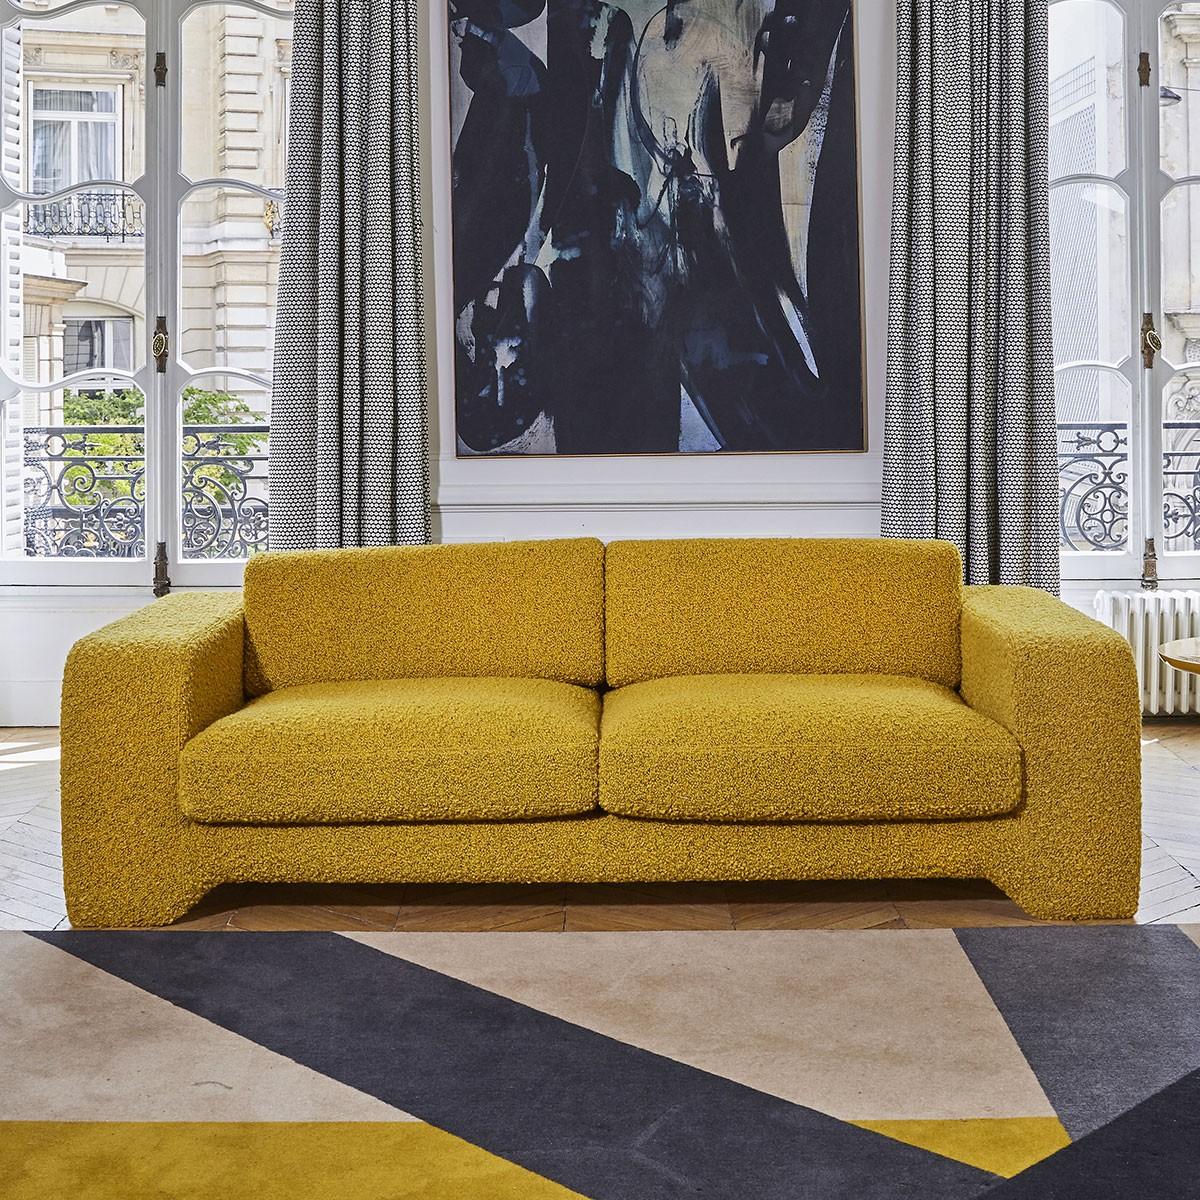 Popus Editions Giovanna 2.5 Seater Sofa in Curry Cork Linen Upholstery.

Giovanna is a sofa with a strong profile. A sober, plush line, with this famous detail that changes everything, so as not to forget its strength of character and this